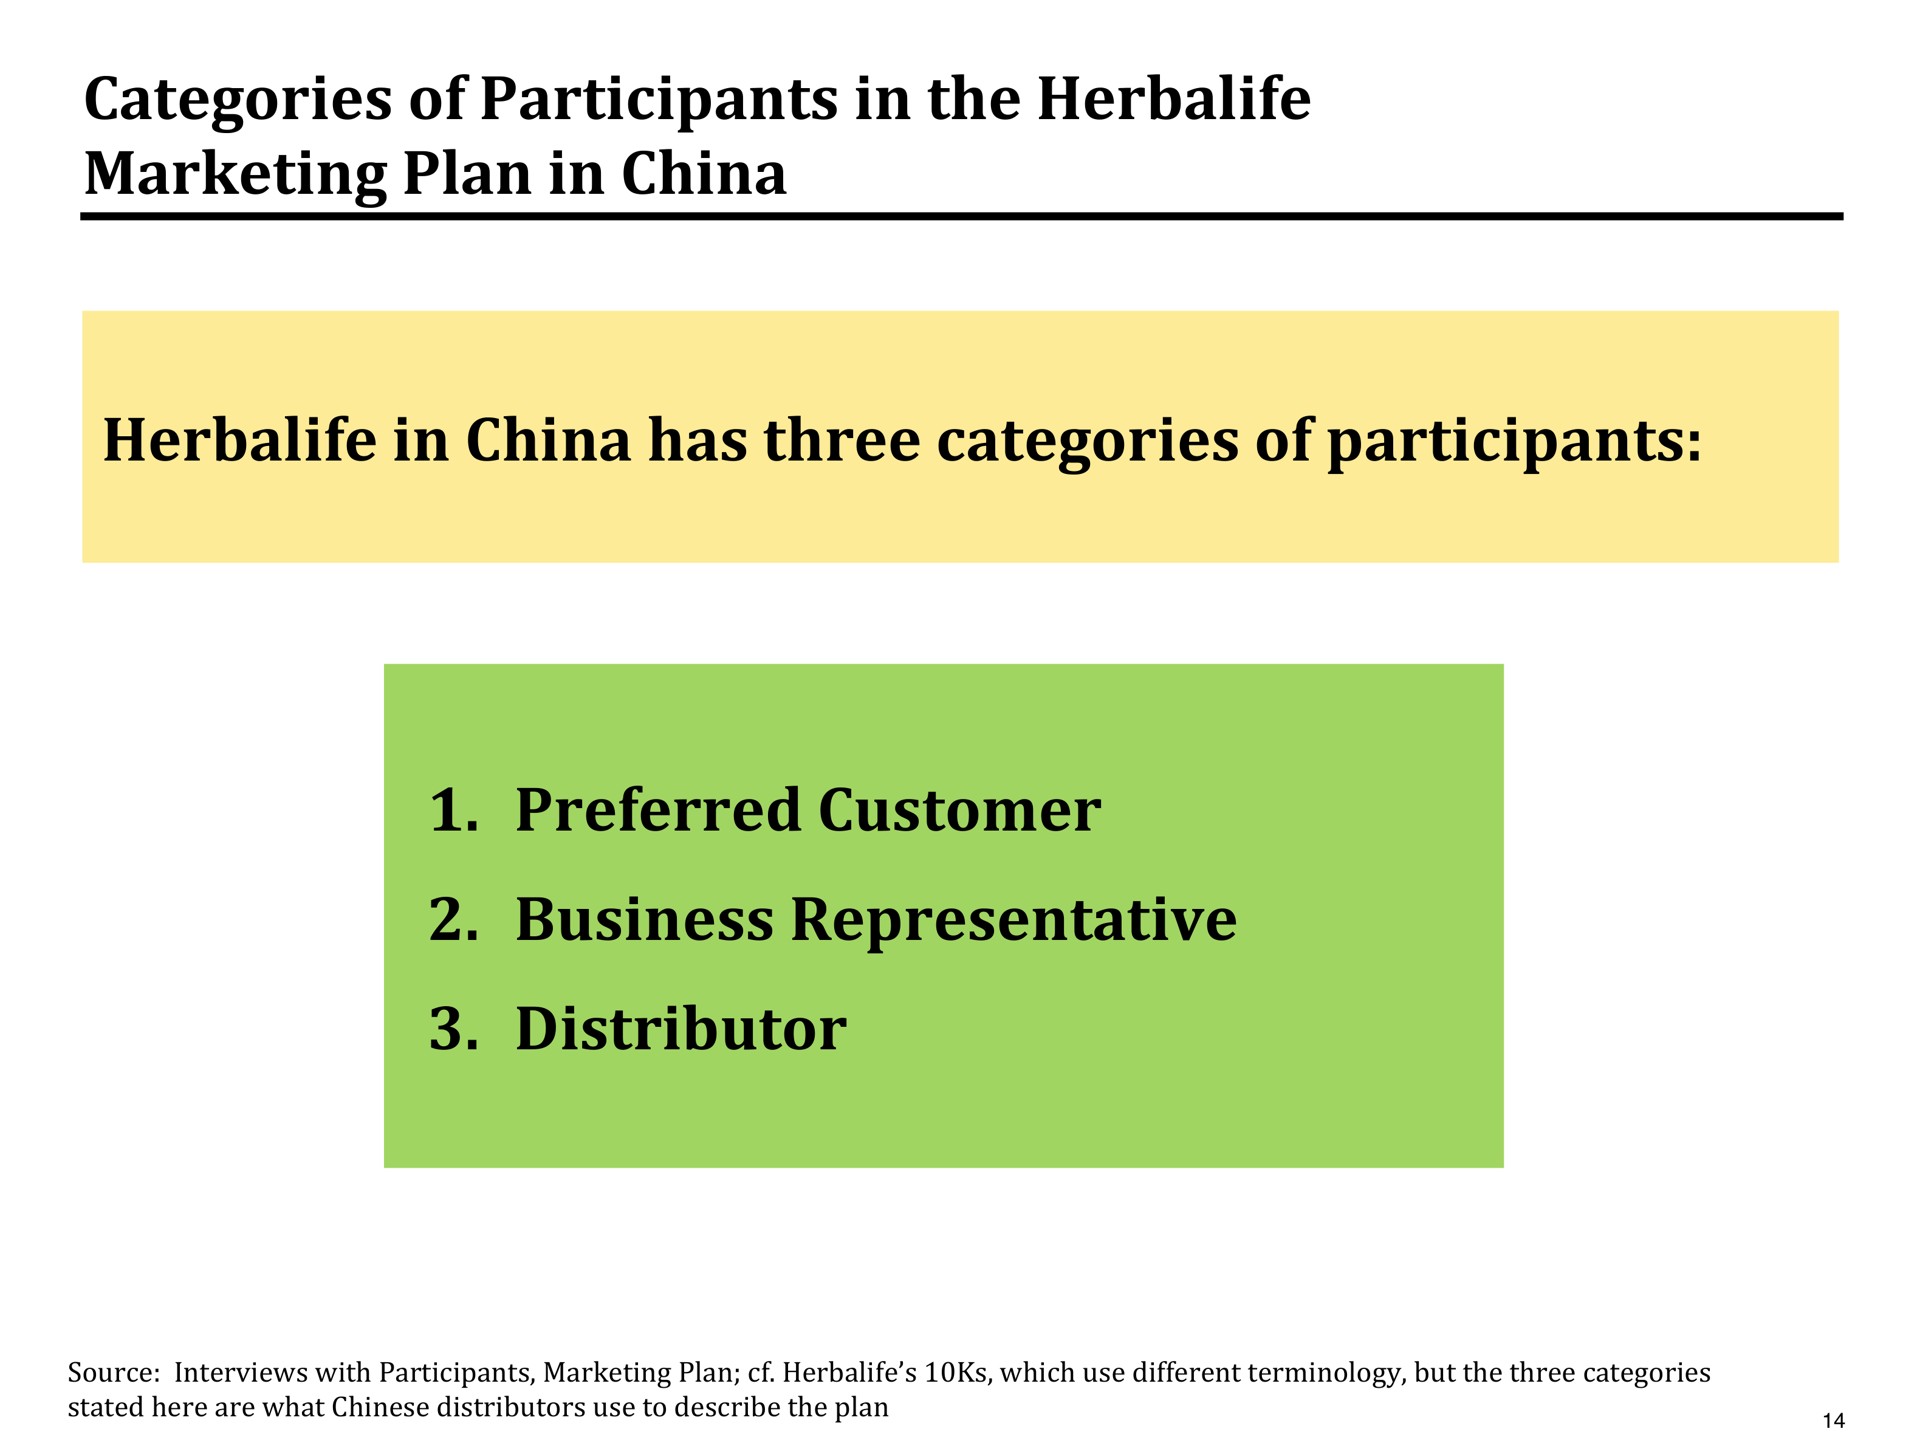 categories of participants in the marketing plan in china in china has three categories of participants preferred customer business representative distributor | Pershing Square